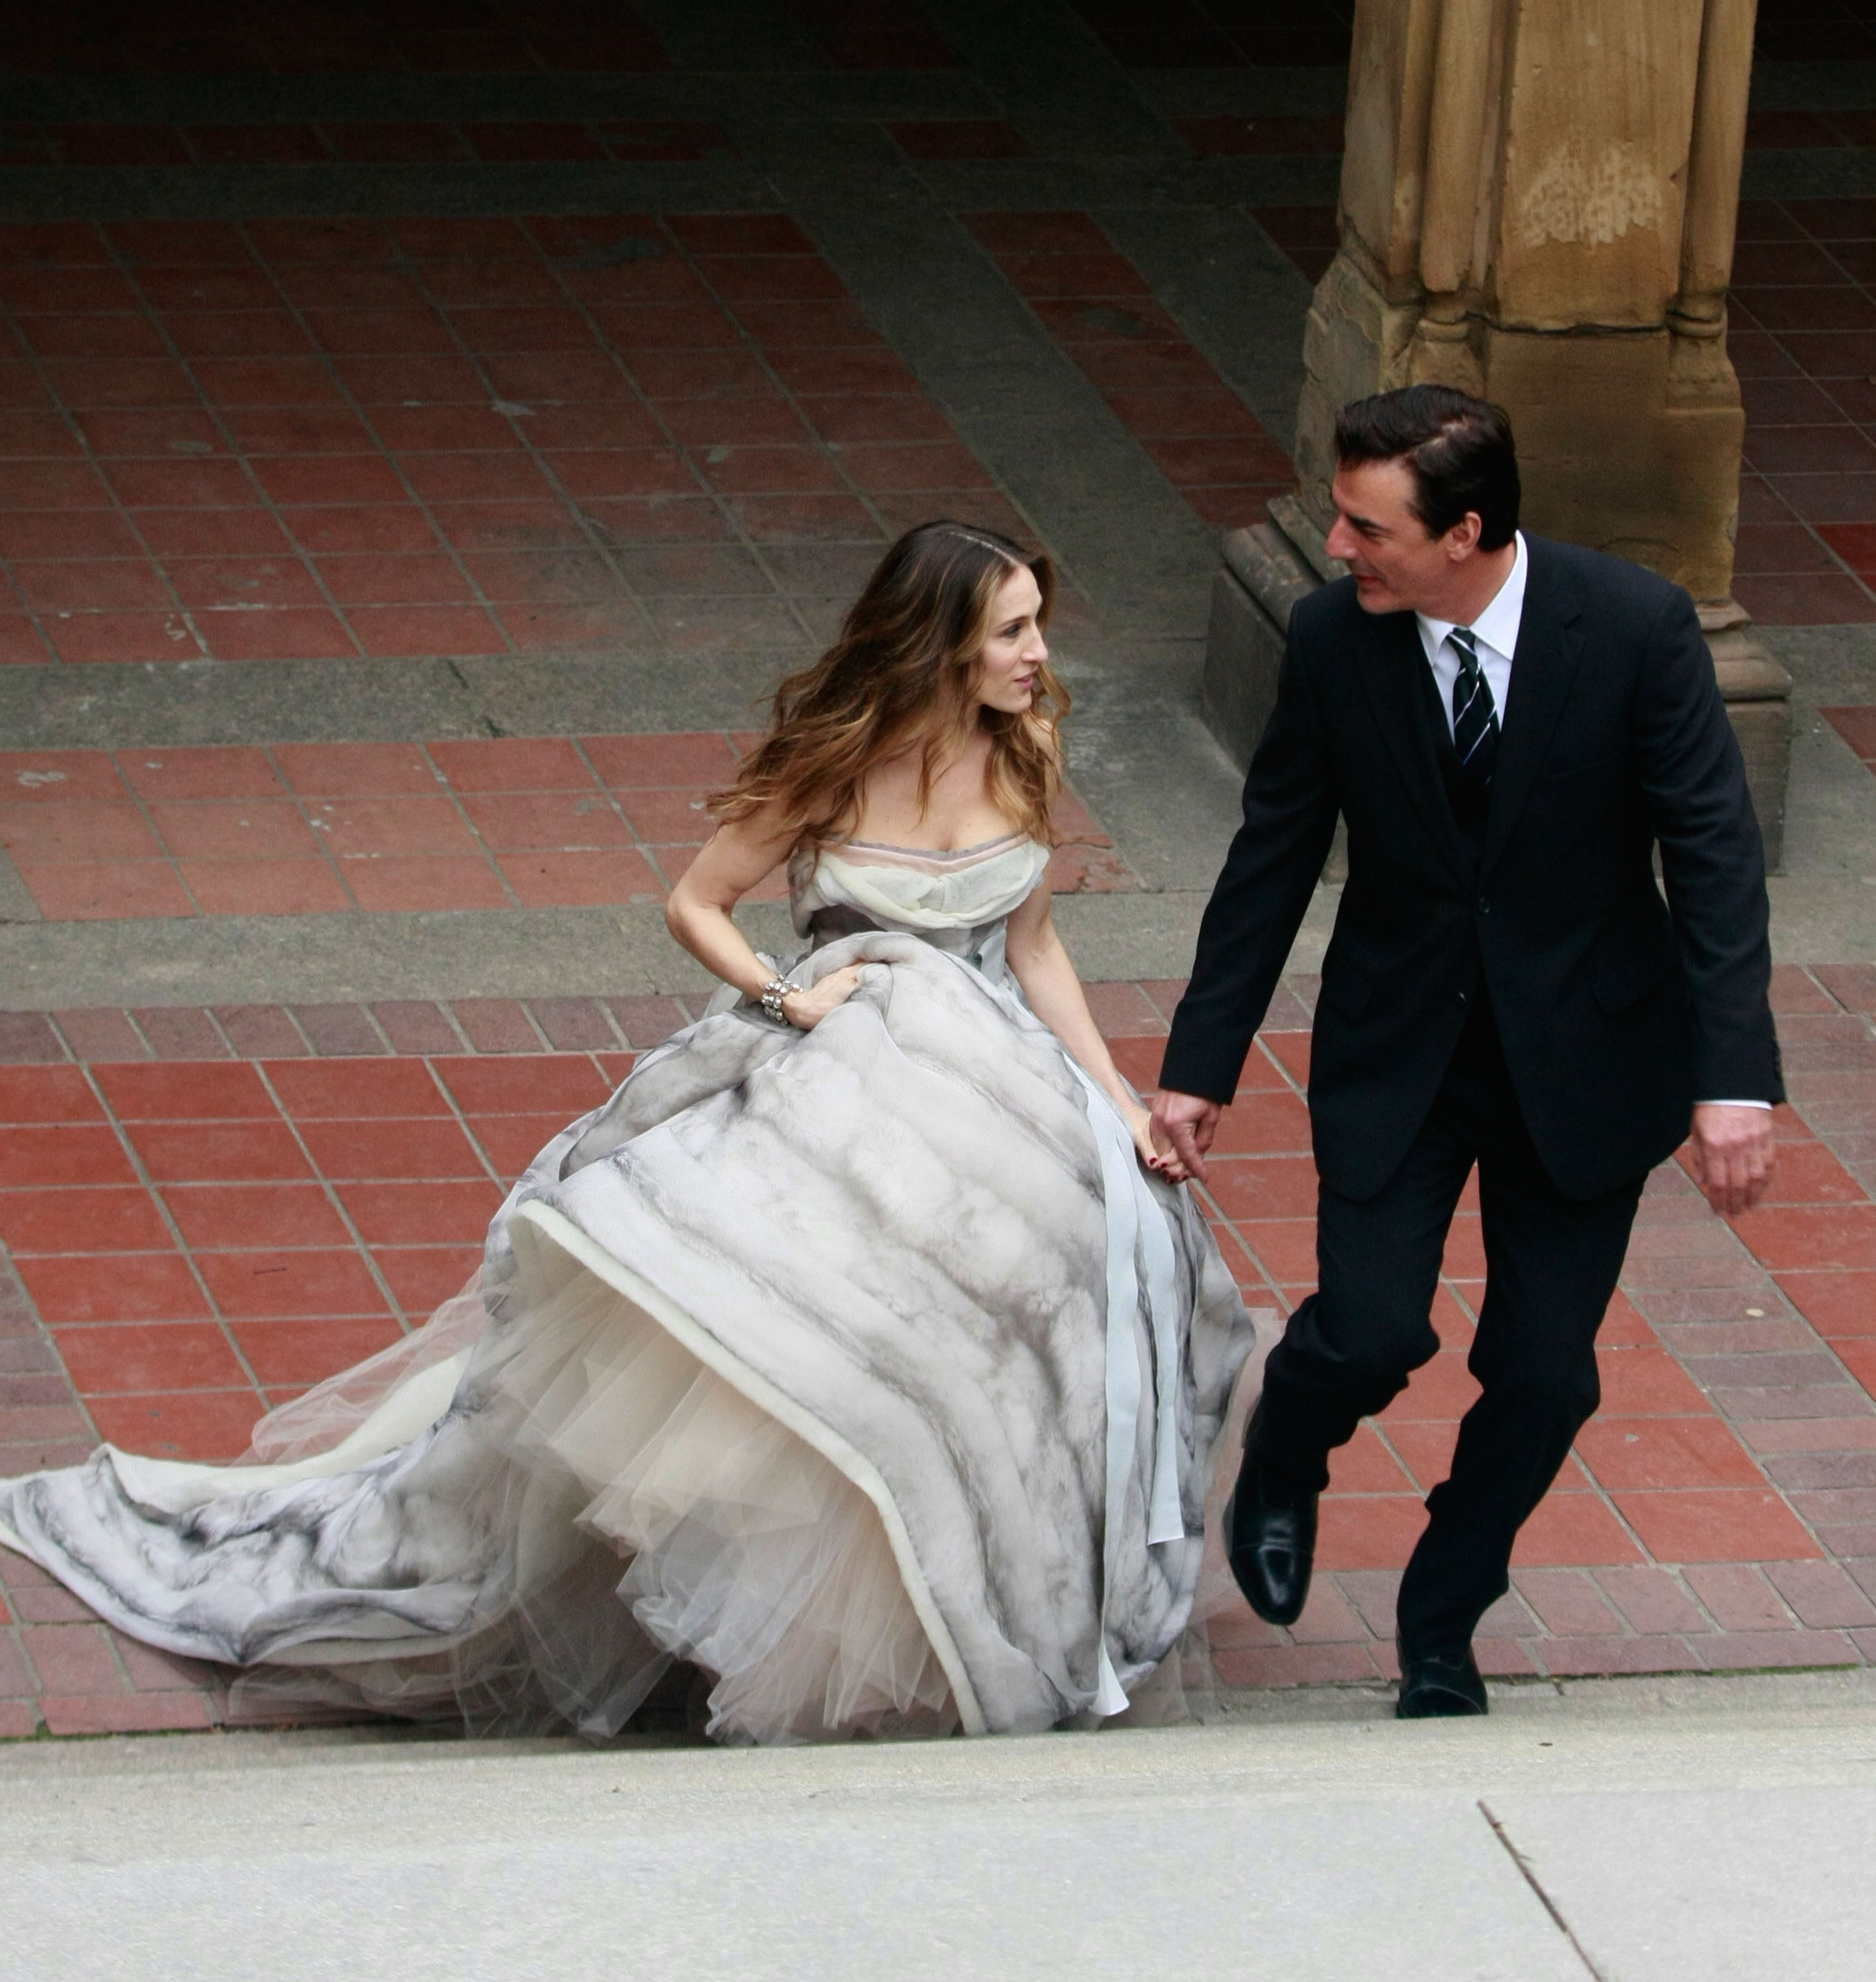 Sarah Jessica Parker and Chris Noth in Central Park on March 7, 2008 